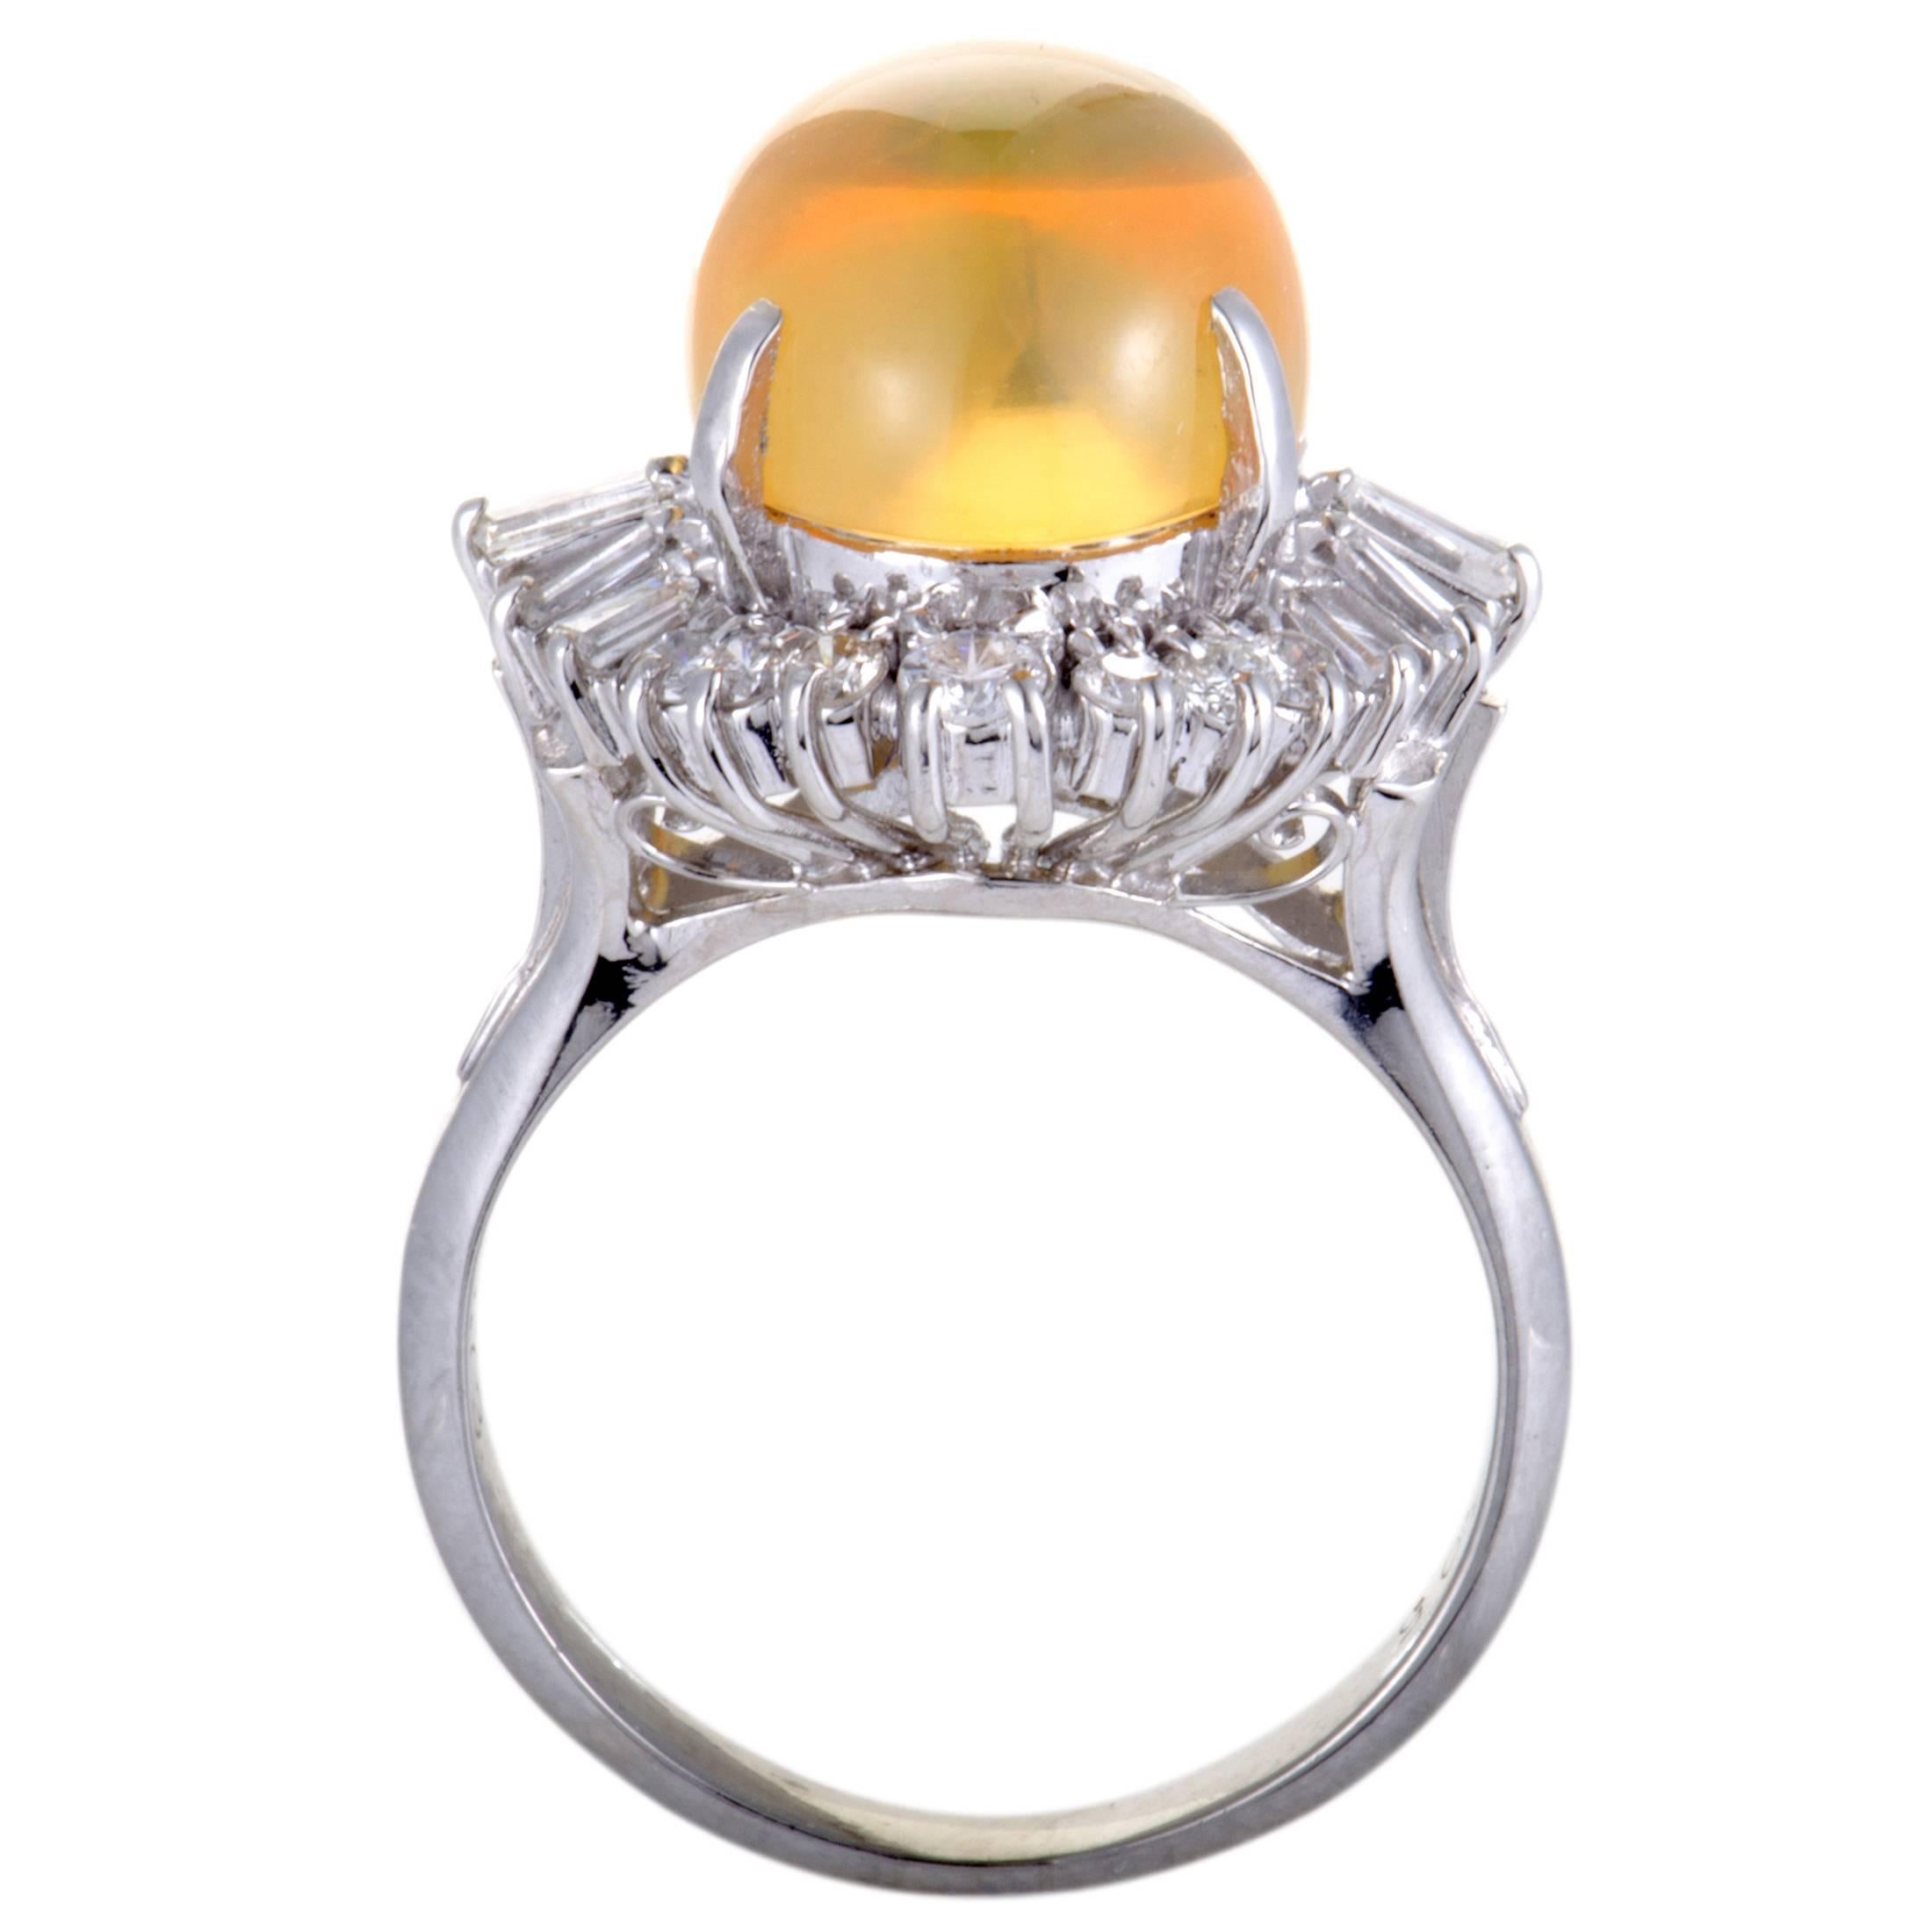 Exquisitely designed and beautifully decorated, this fabulous ring is made in attractive platinum. The stunning ring features a captivating yellow fire opal, weighing 6.05ct, surrounded by 0.73ct of dazzling diamonds that boast an exceptionally